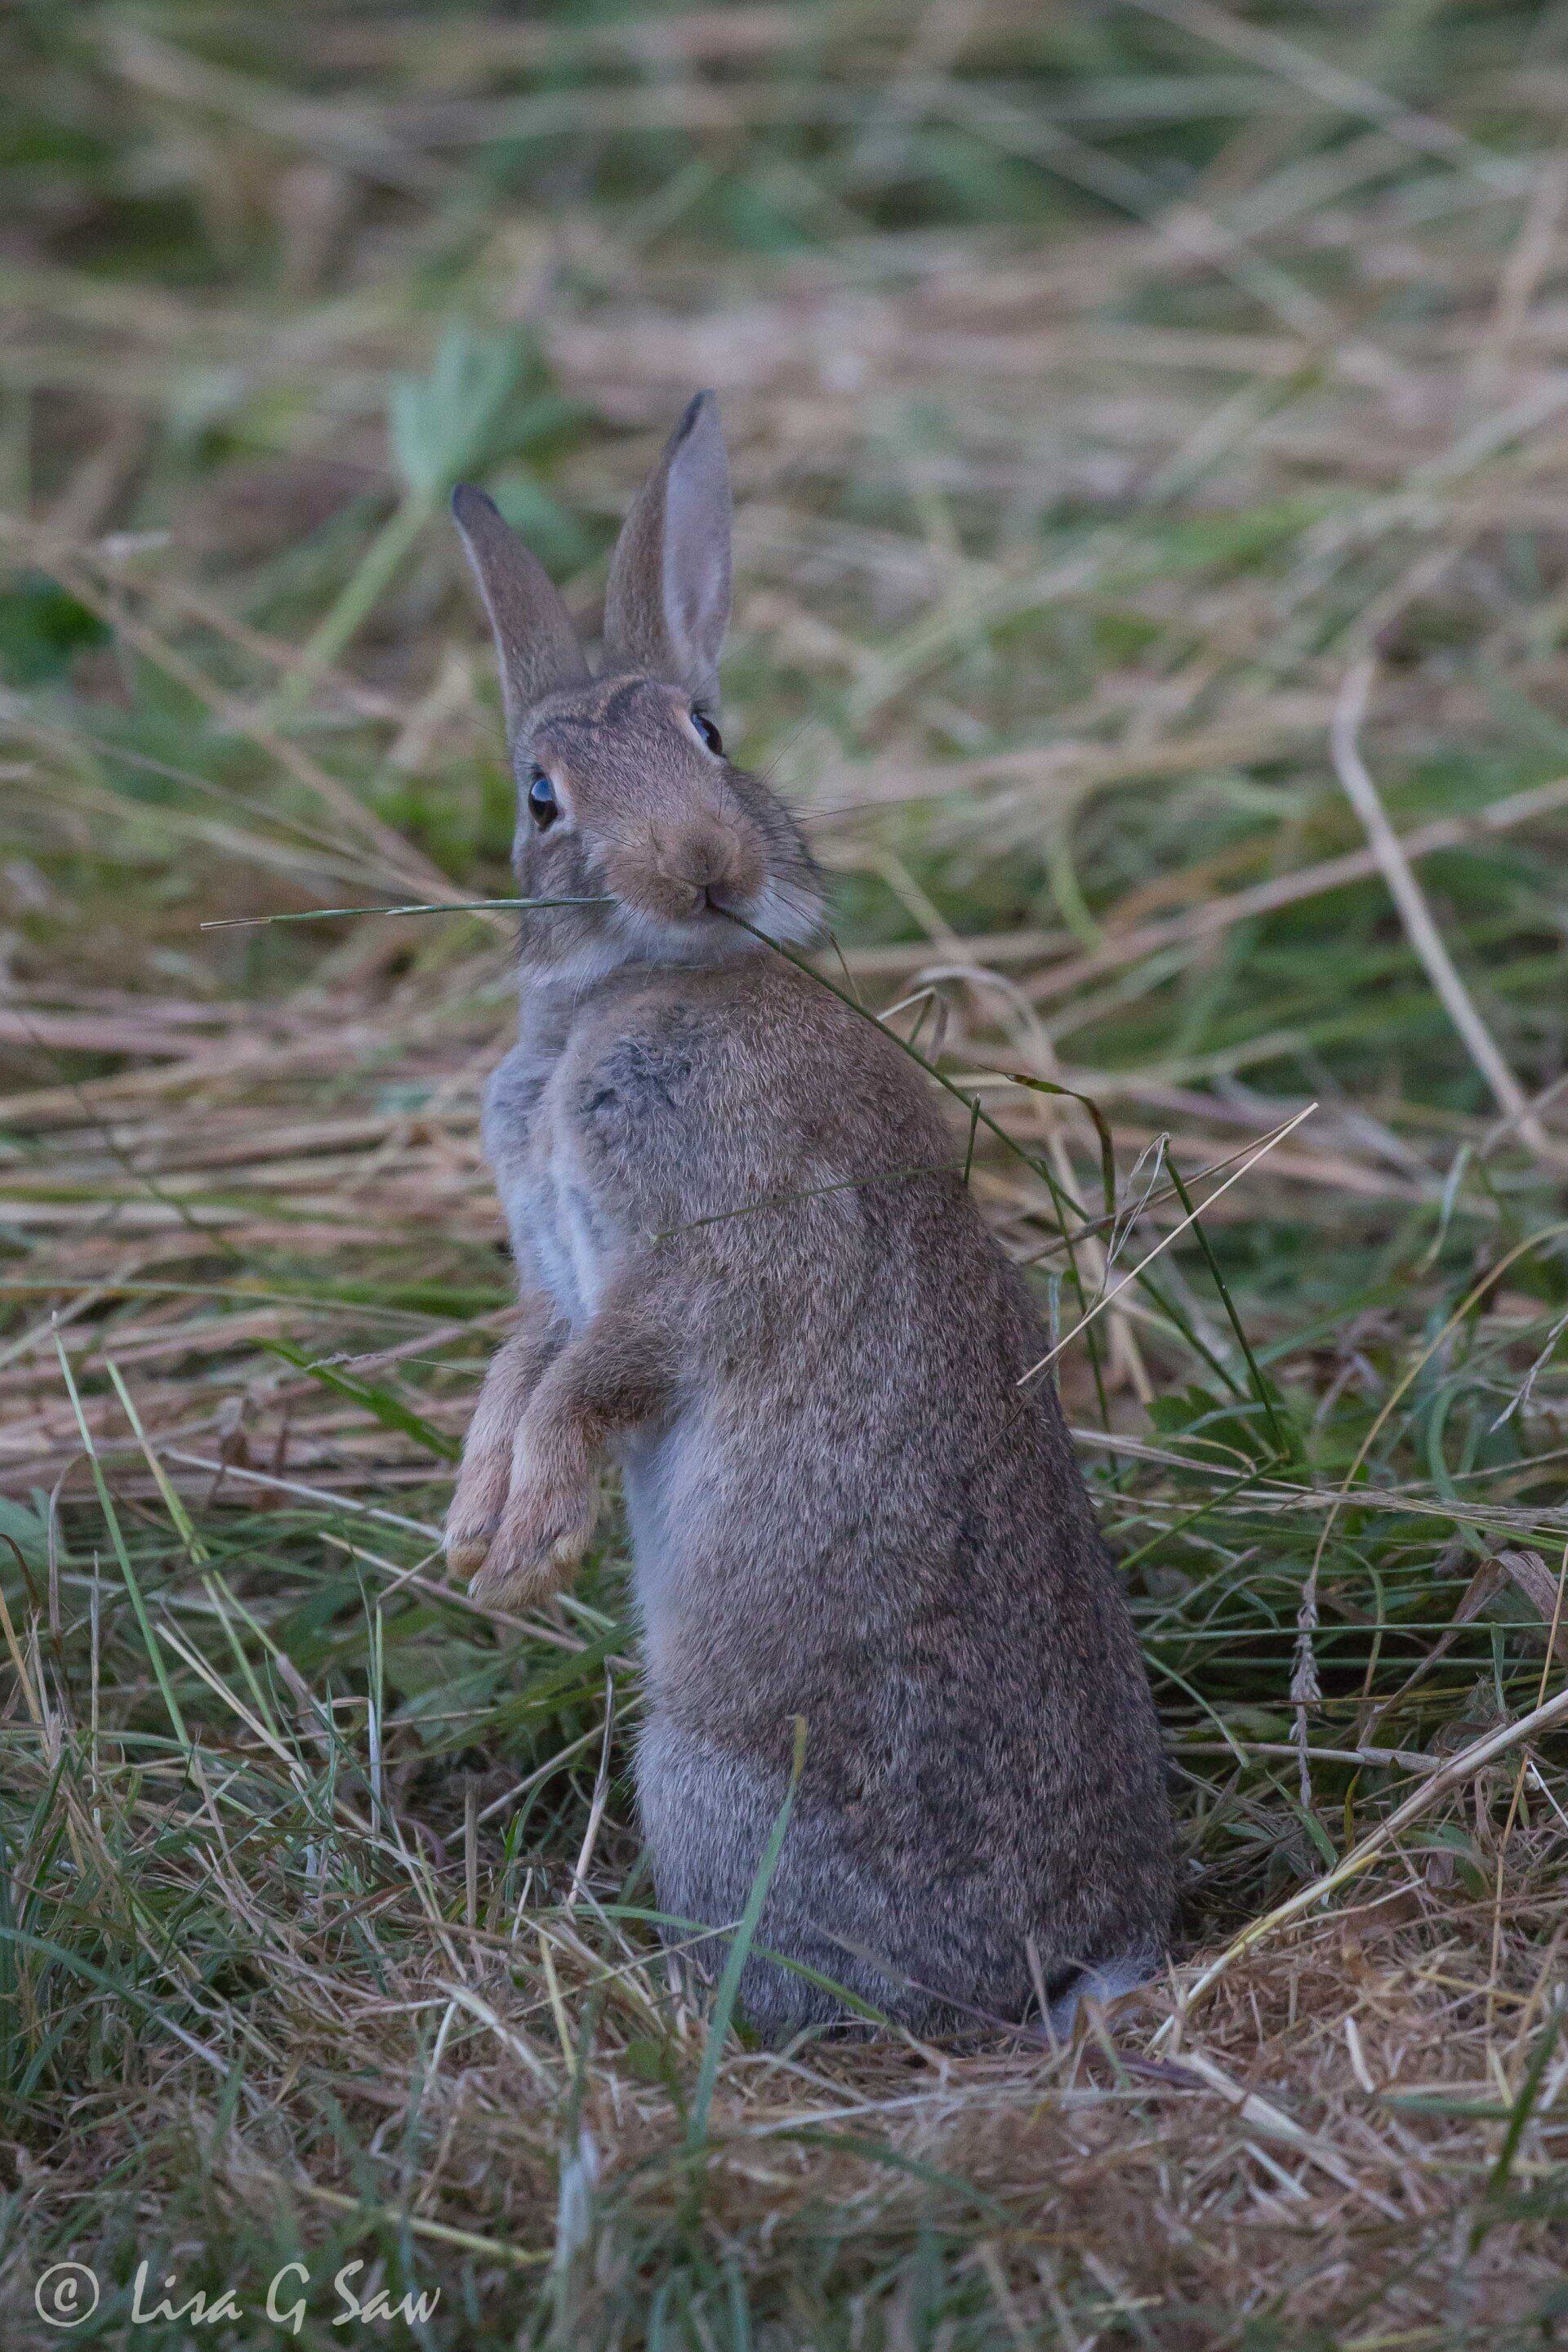 Rabbit sitting upright eating blade of grass